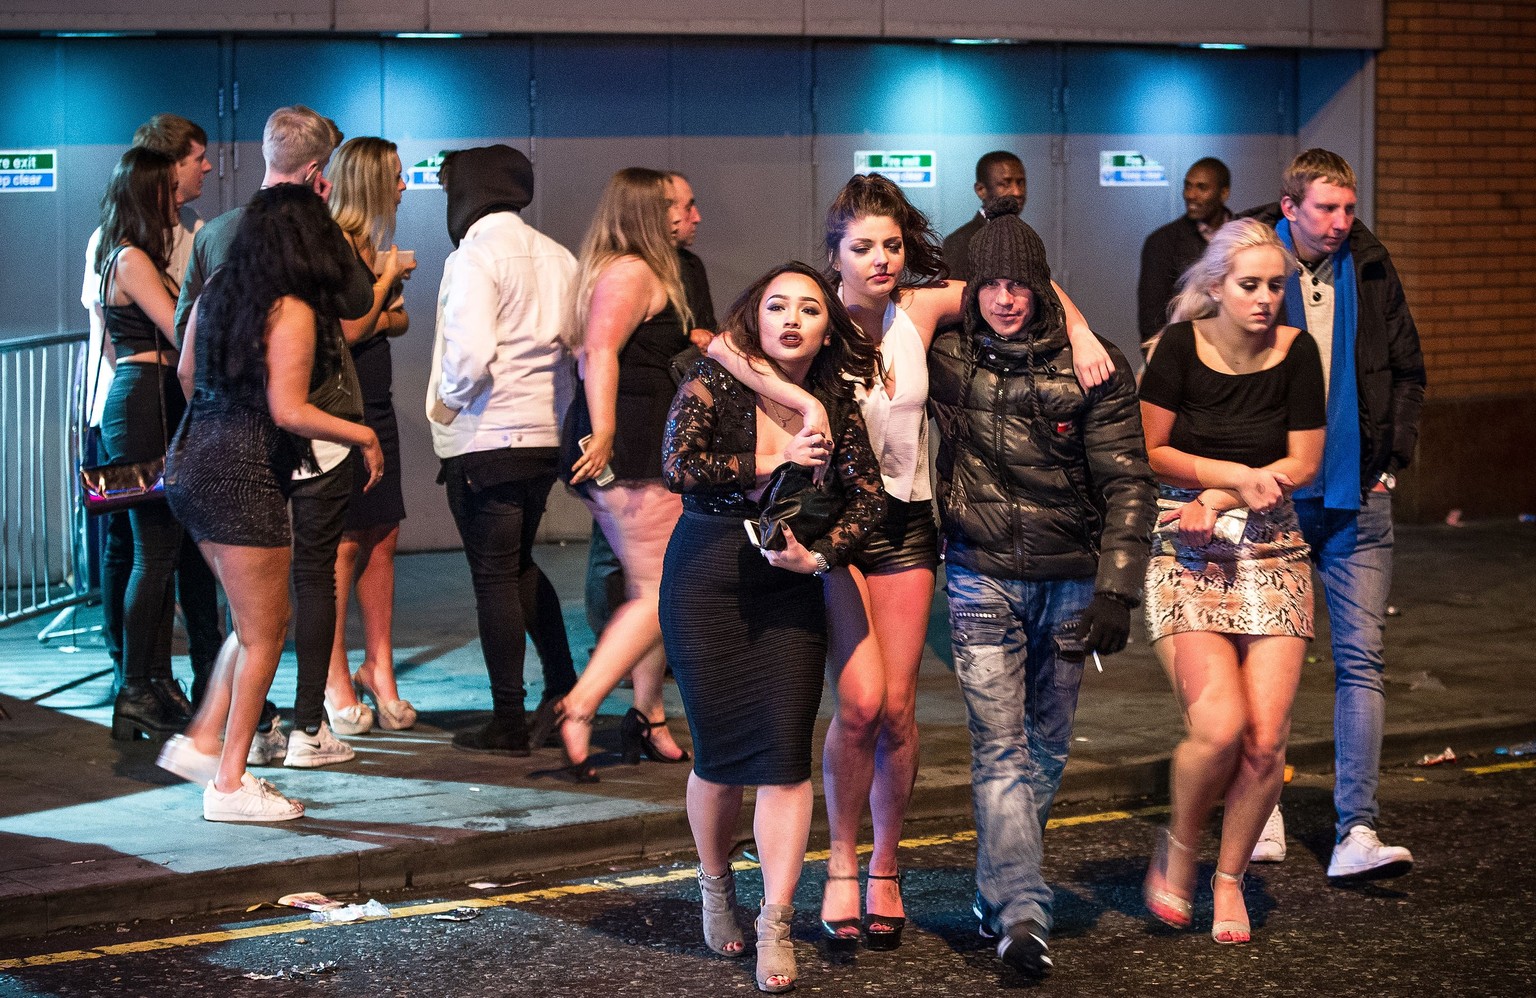 Mandatory Credit: Photo by Joel Goodman/LNP/REX/Shutterstock (5505322x)
Revellers in Manchester on a New Year night out at the clubs around the city centre&#039;s Printworks venue .
New Year celebra ...